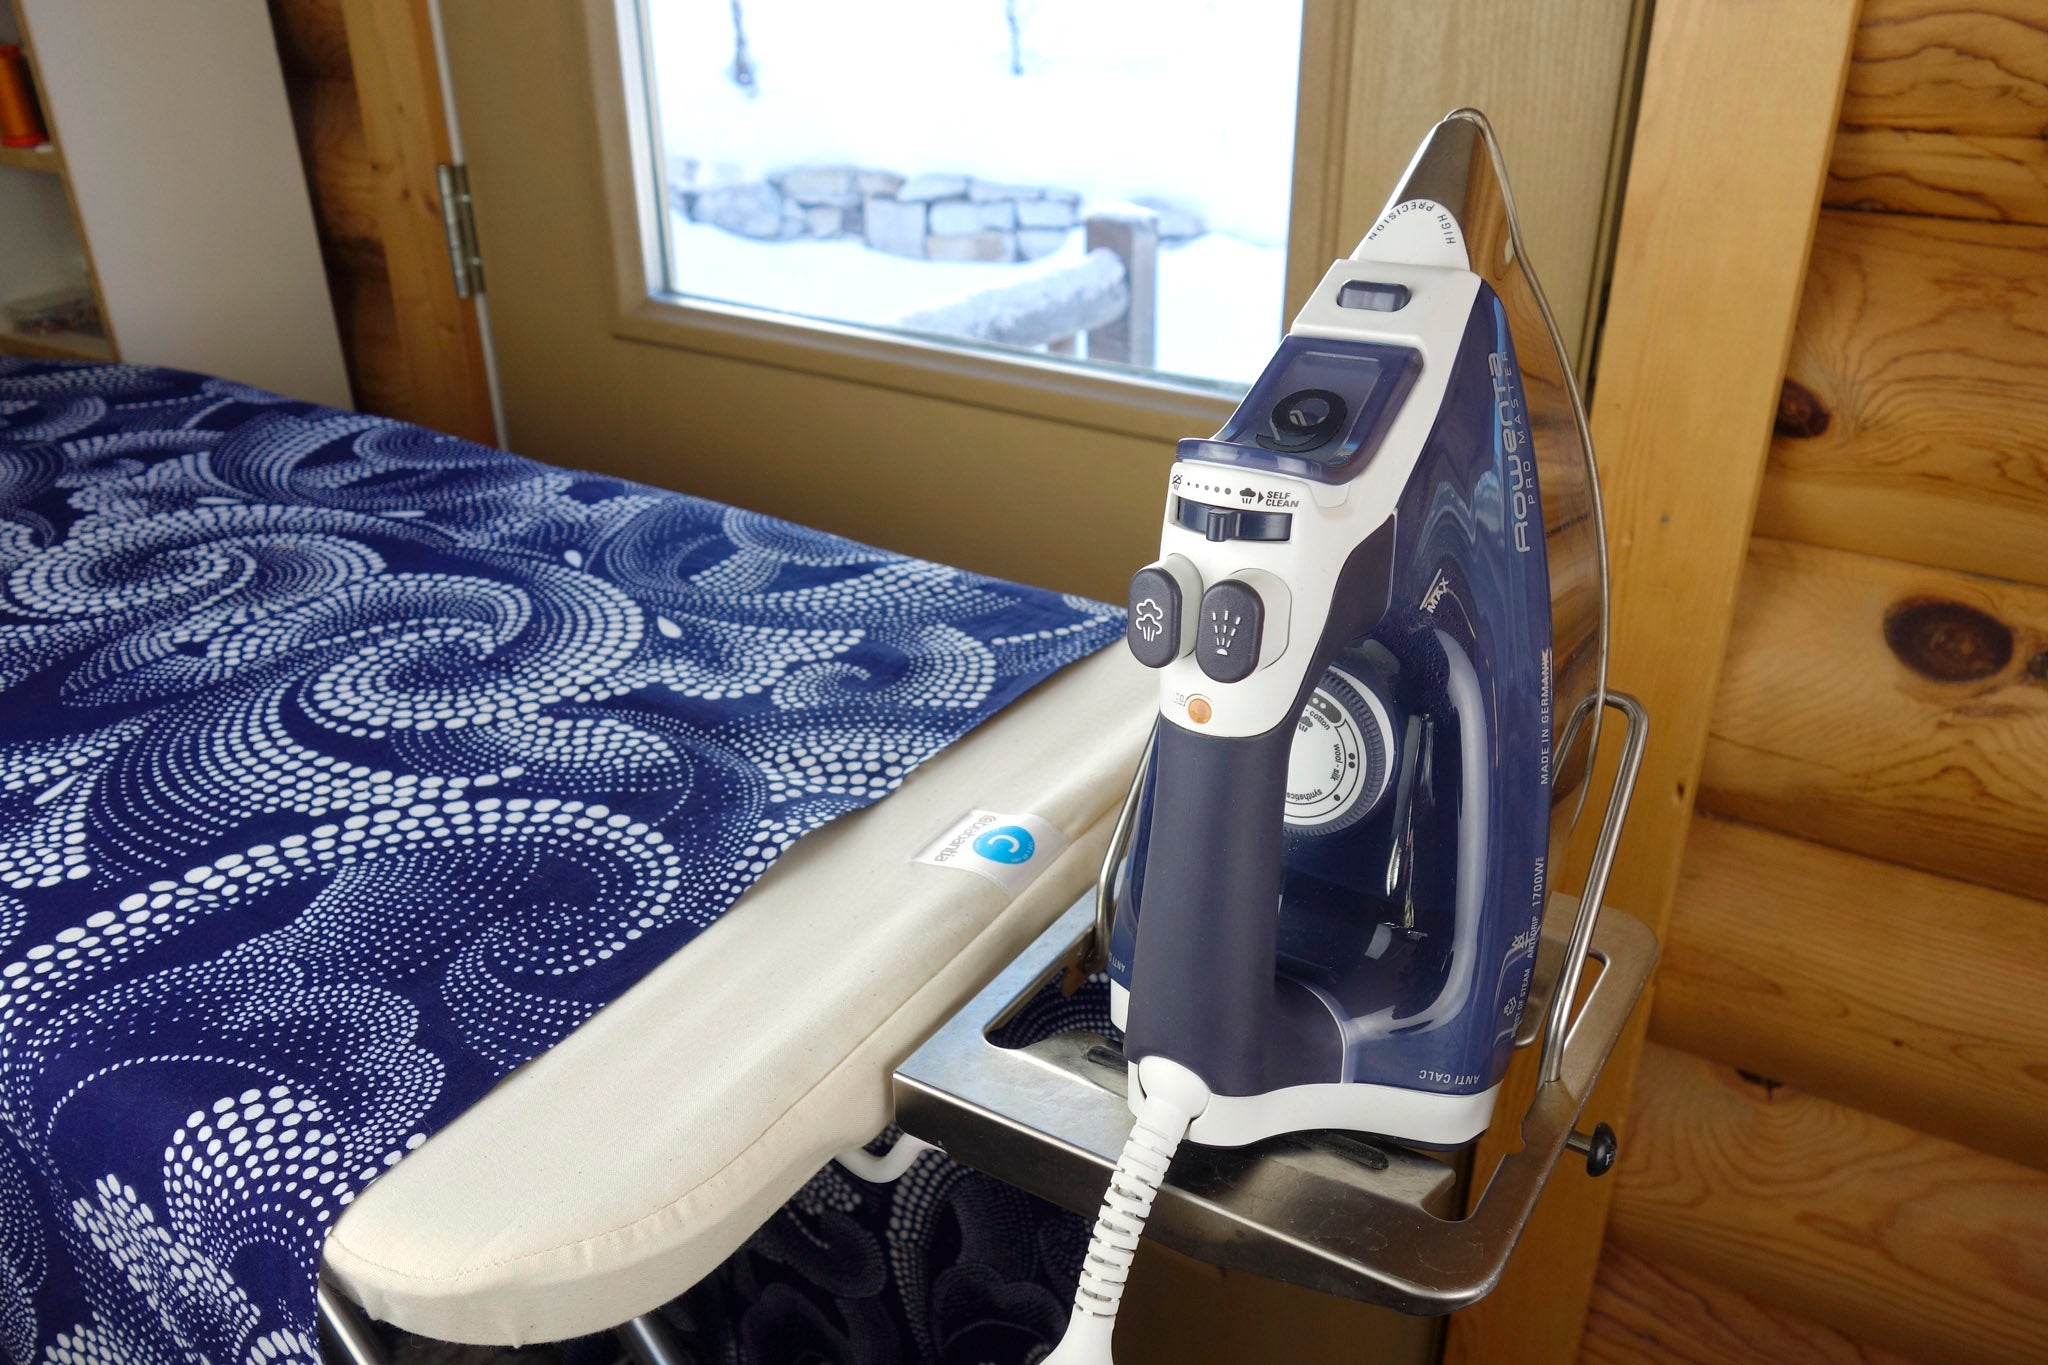 Brabantia ironing board with a Rowenta pro iron in the sewing studio of Patricia Belyea